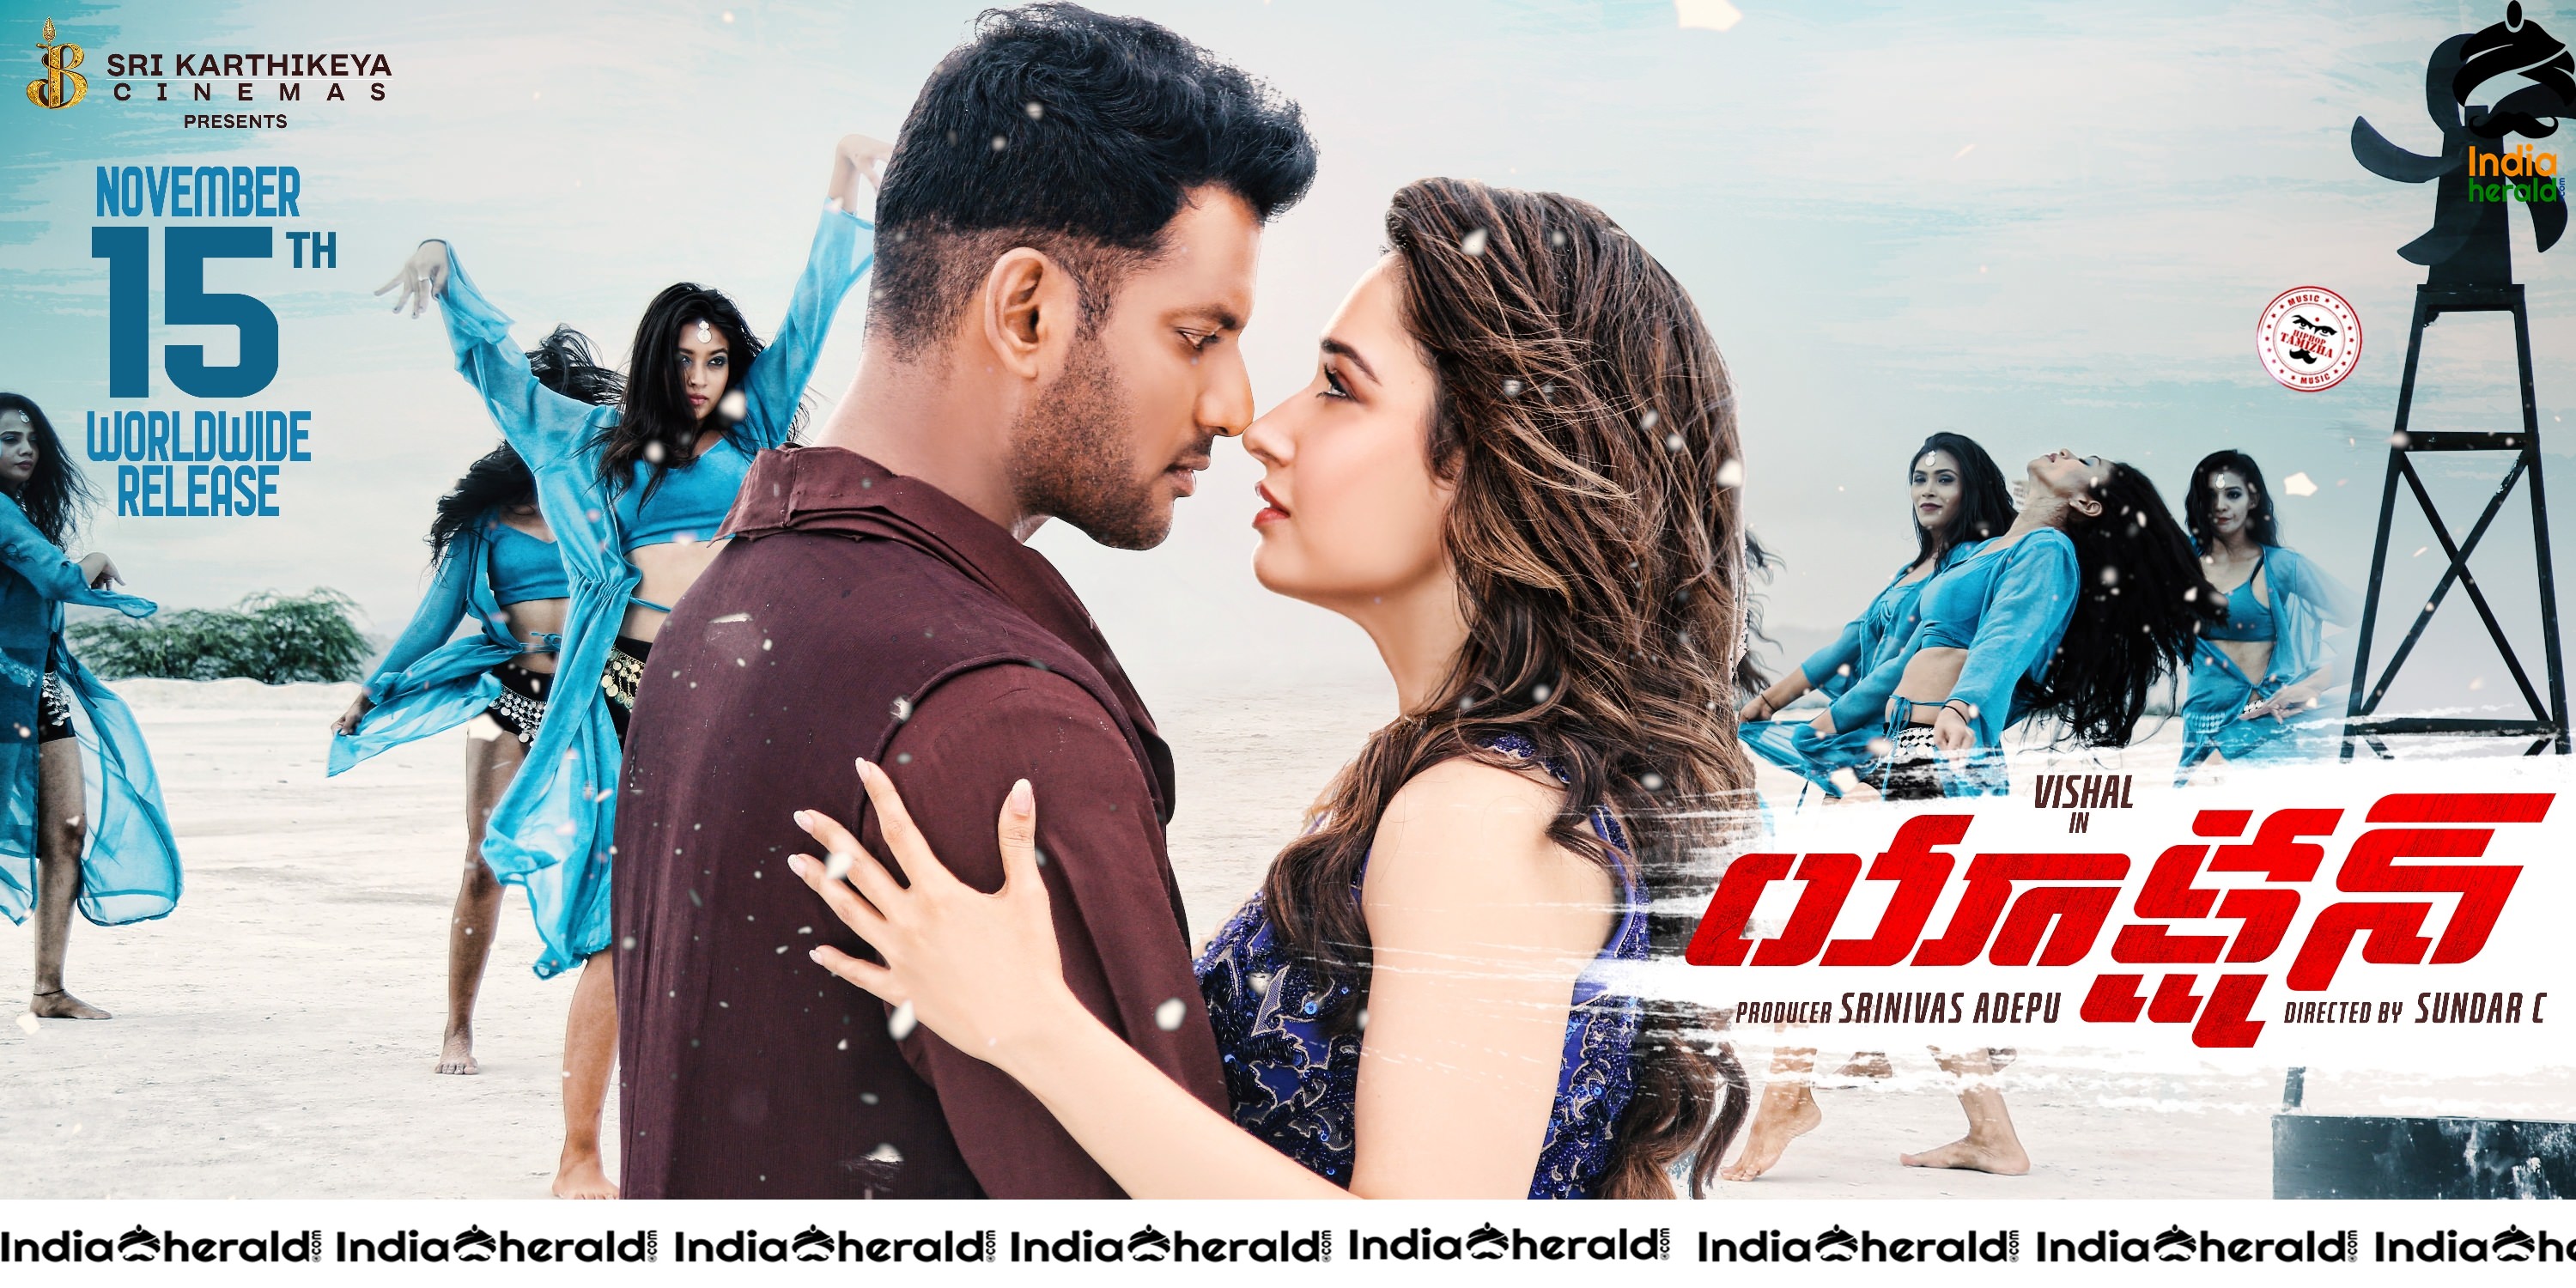 Action Movie Latest HD Telugu Poster and Still featuring Tamanna and Vishal